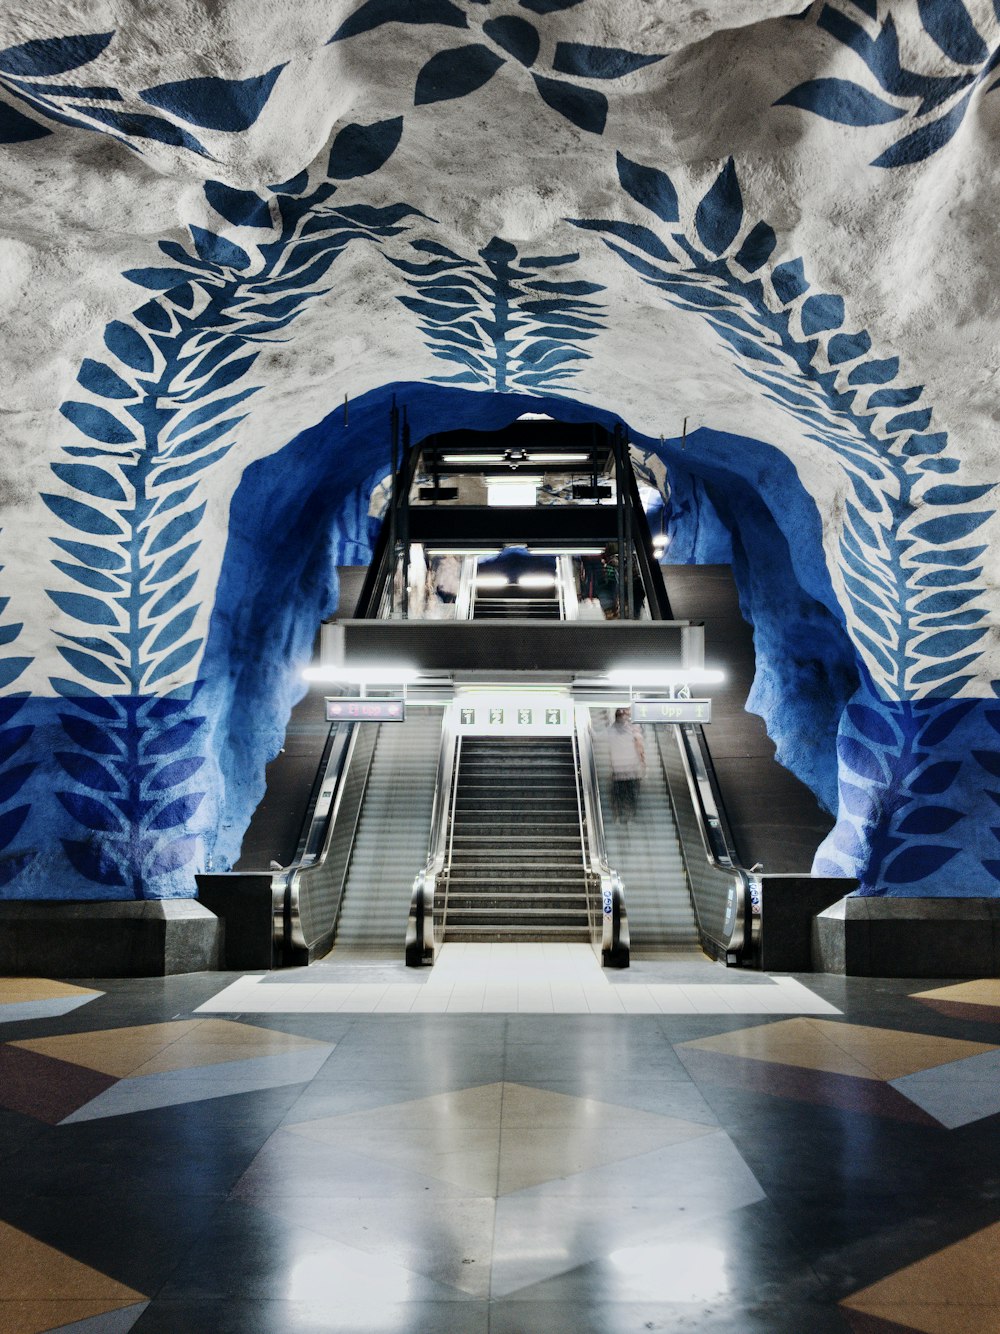 an escalator in a building with a mural on the wall